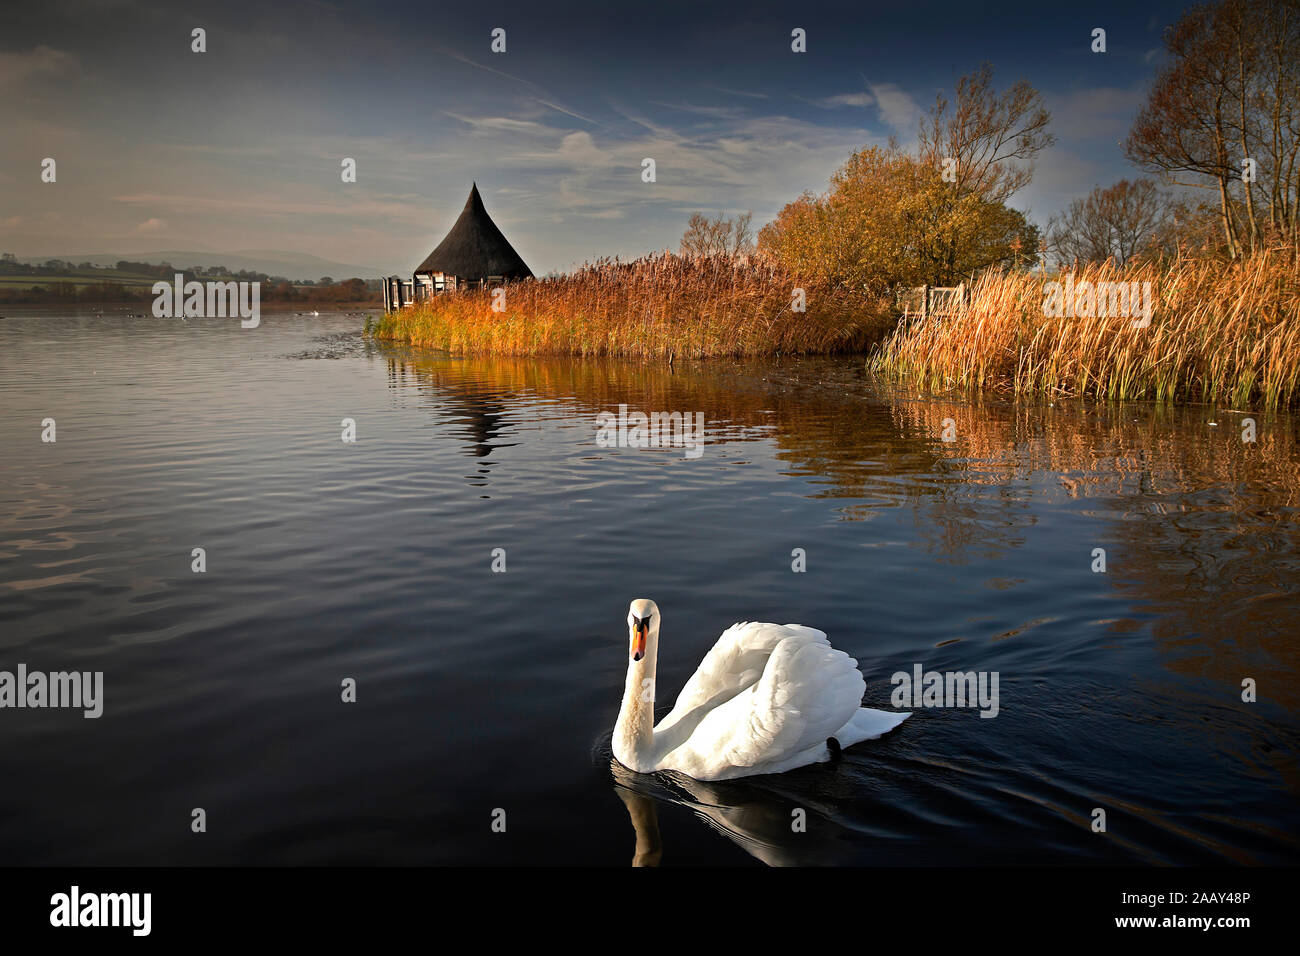 Lake and calm water with swan in foreground and ancient cranog wooden hut in evening light in background Stock Photo